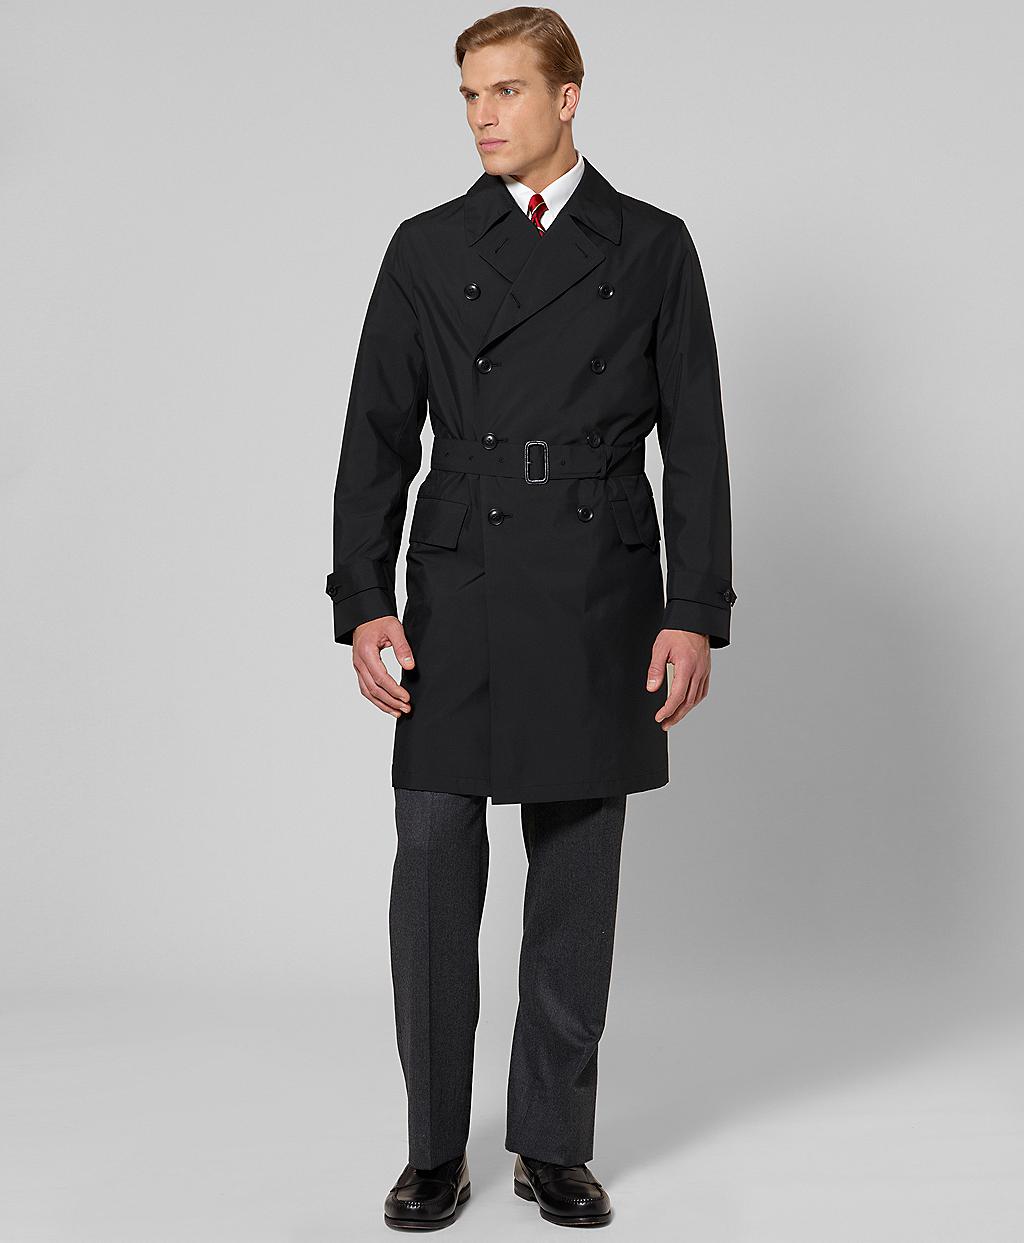 Lyst - Brooks Brothers Doublebreasted Trench Coat in Black for Men